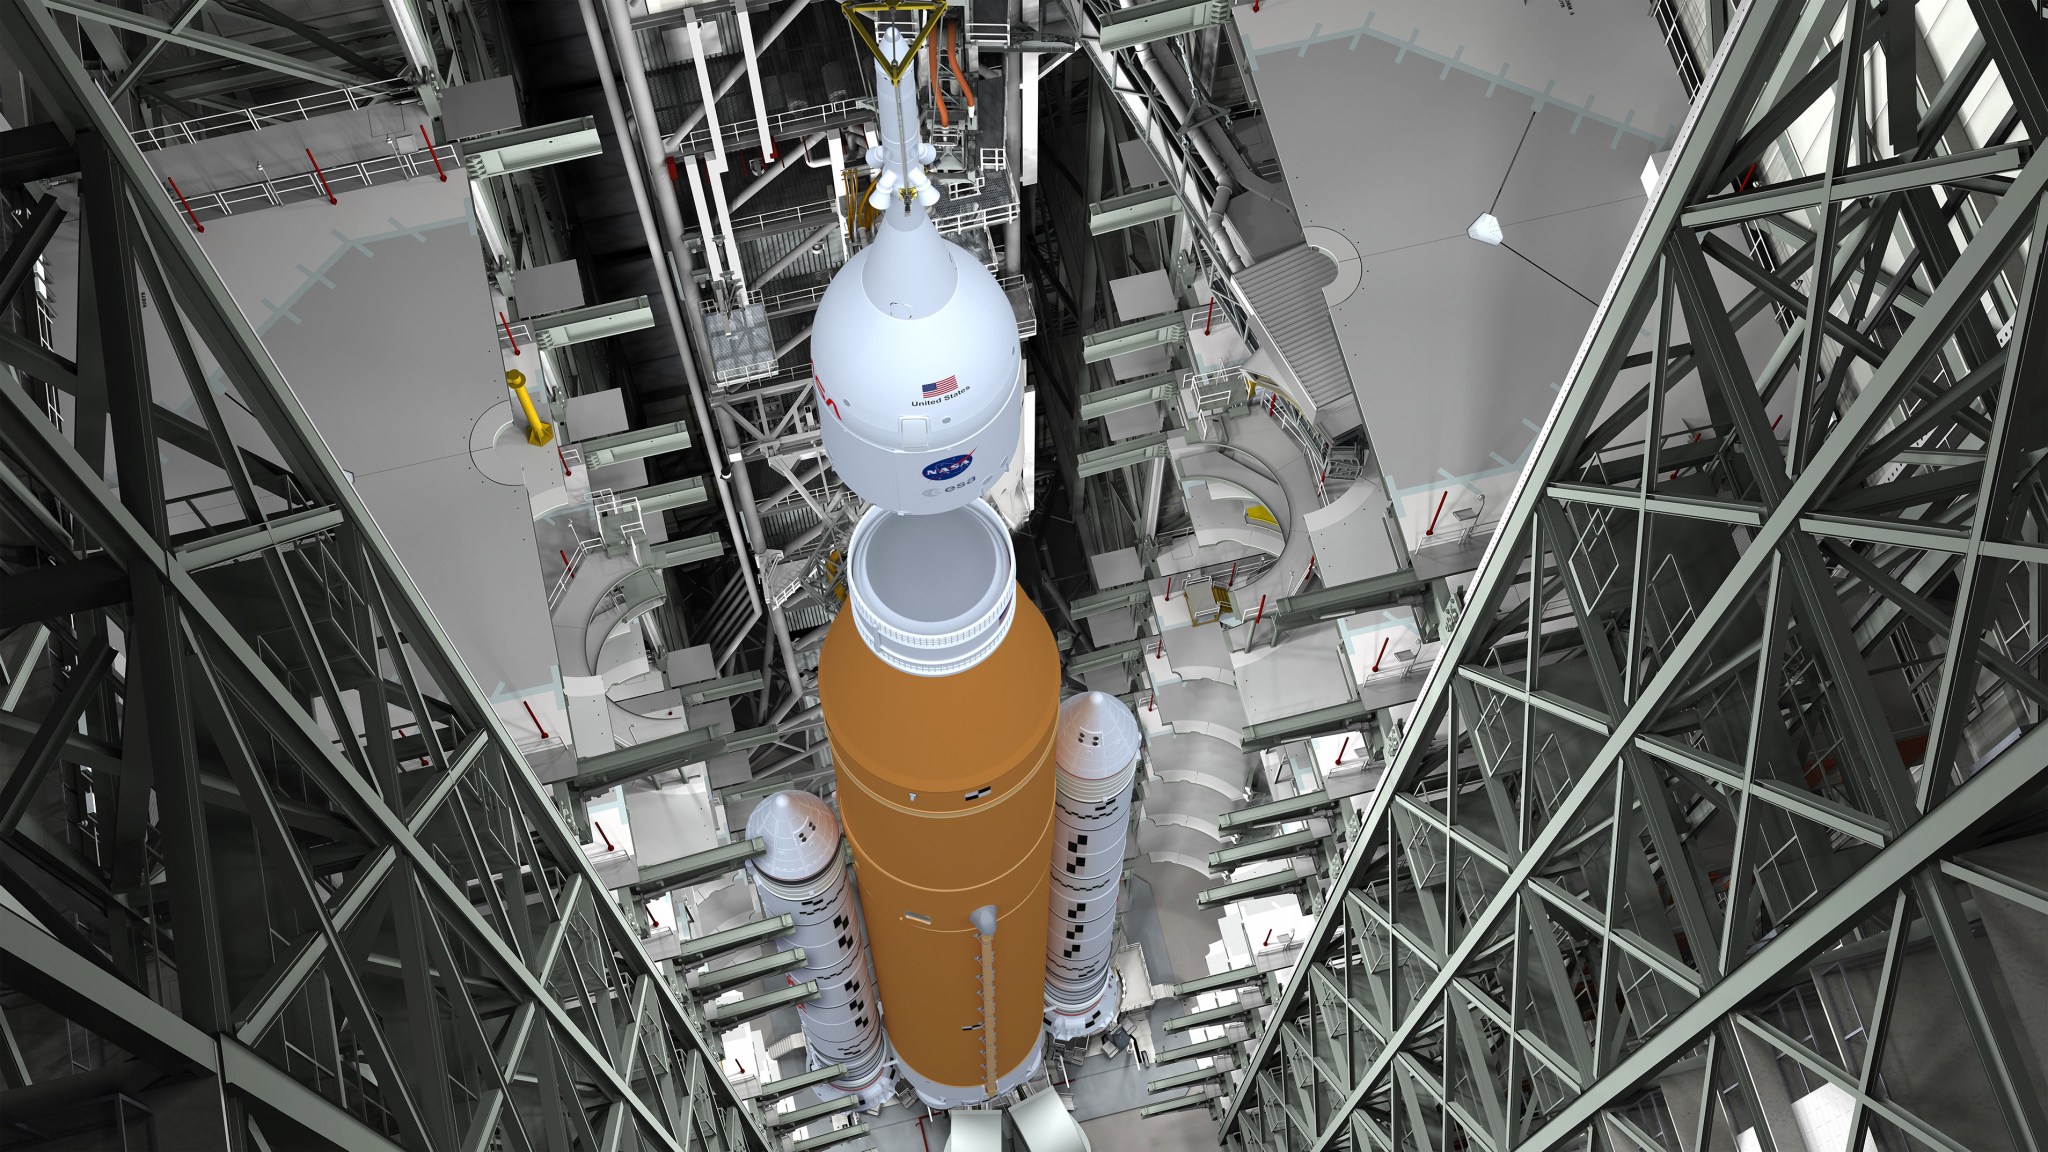 Artist concept of NASA's Space Launch System (SLS) in VAB